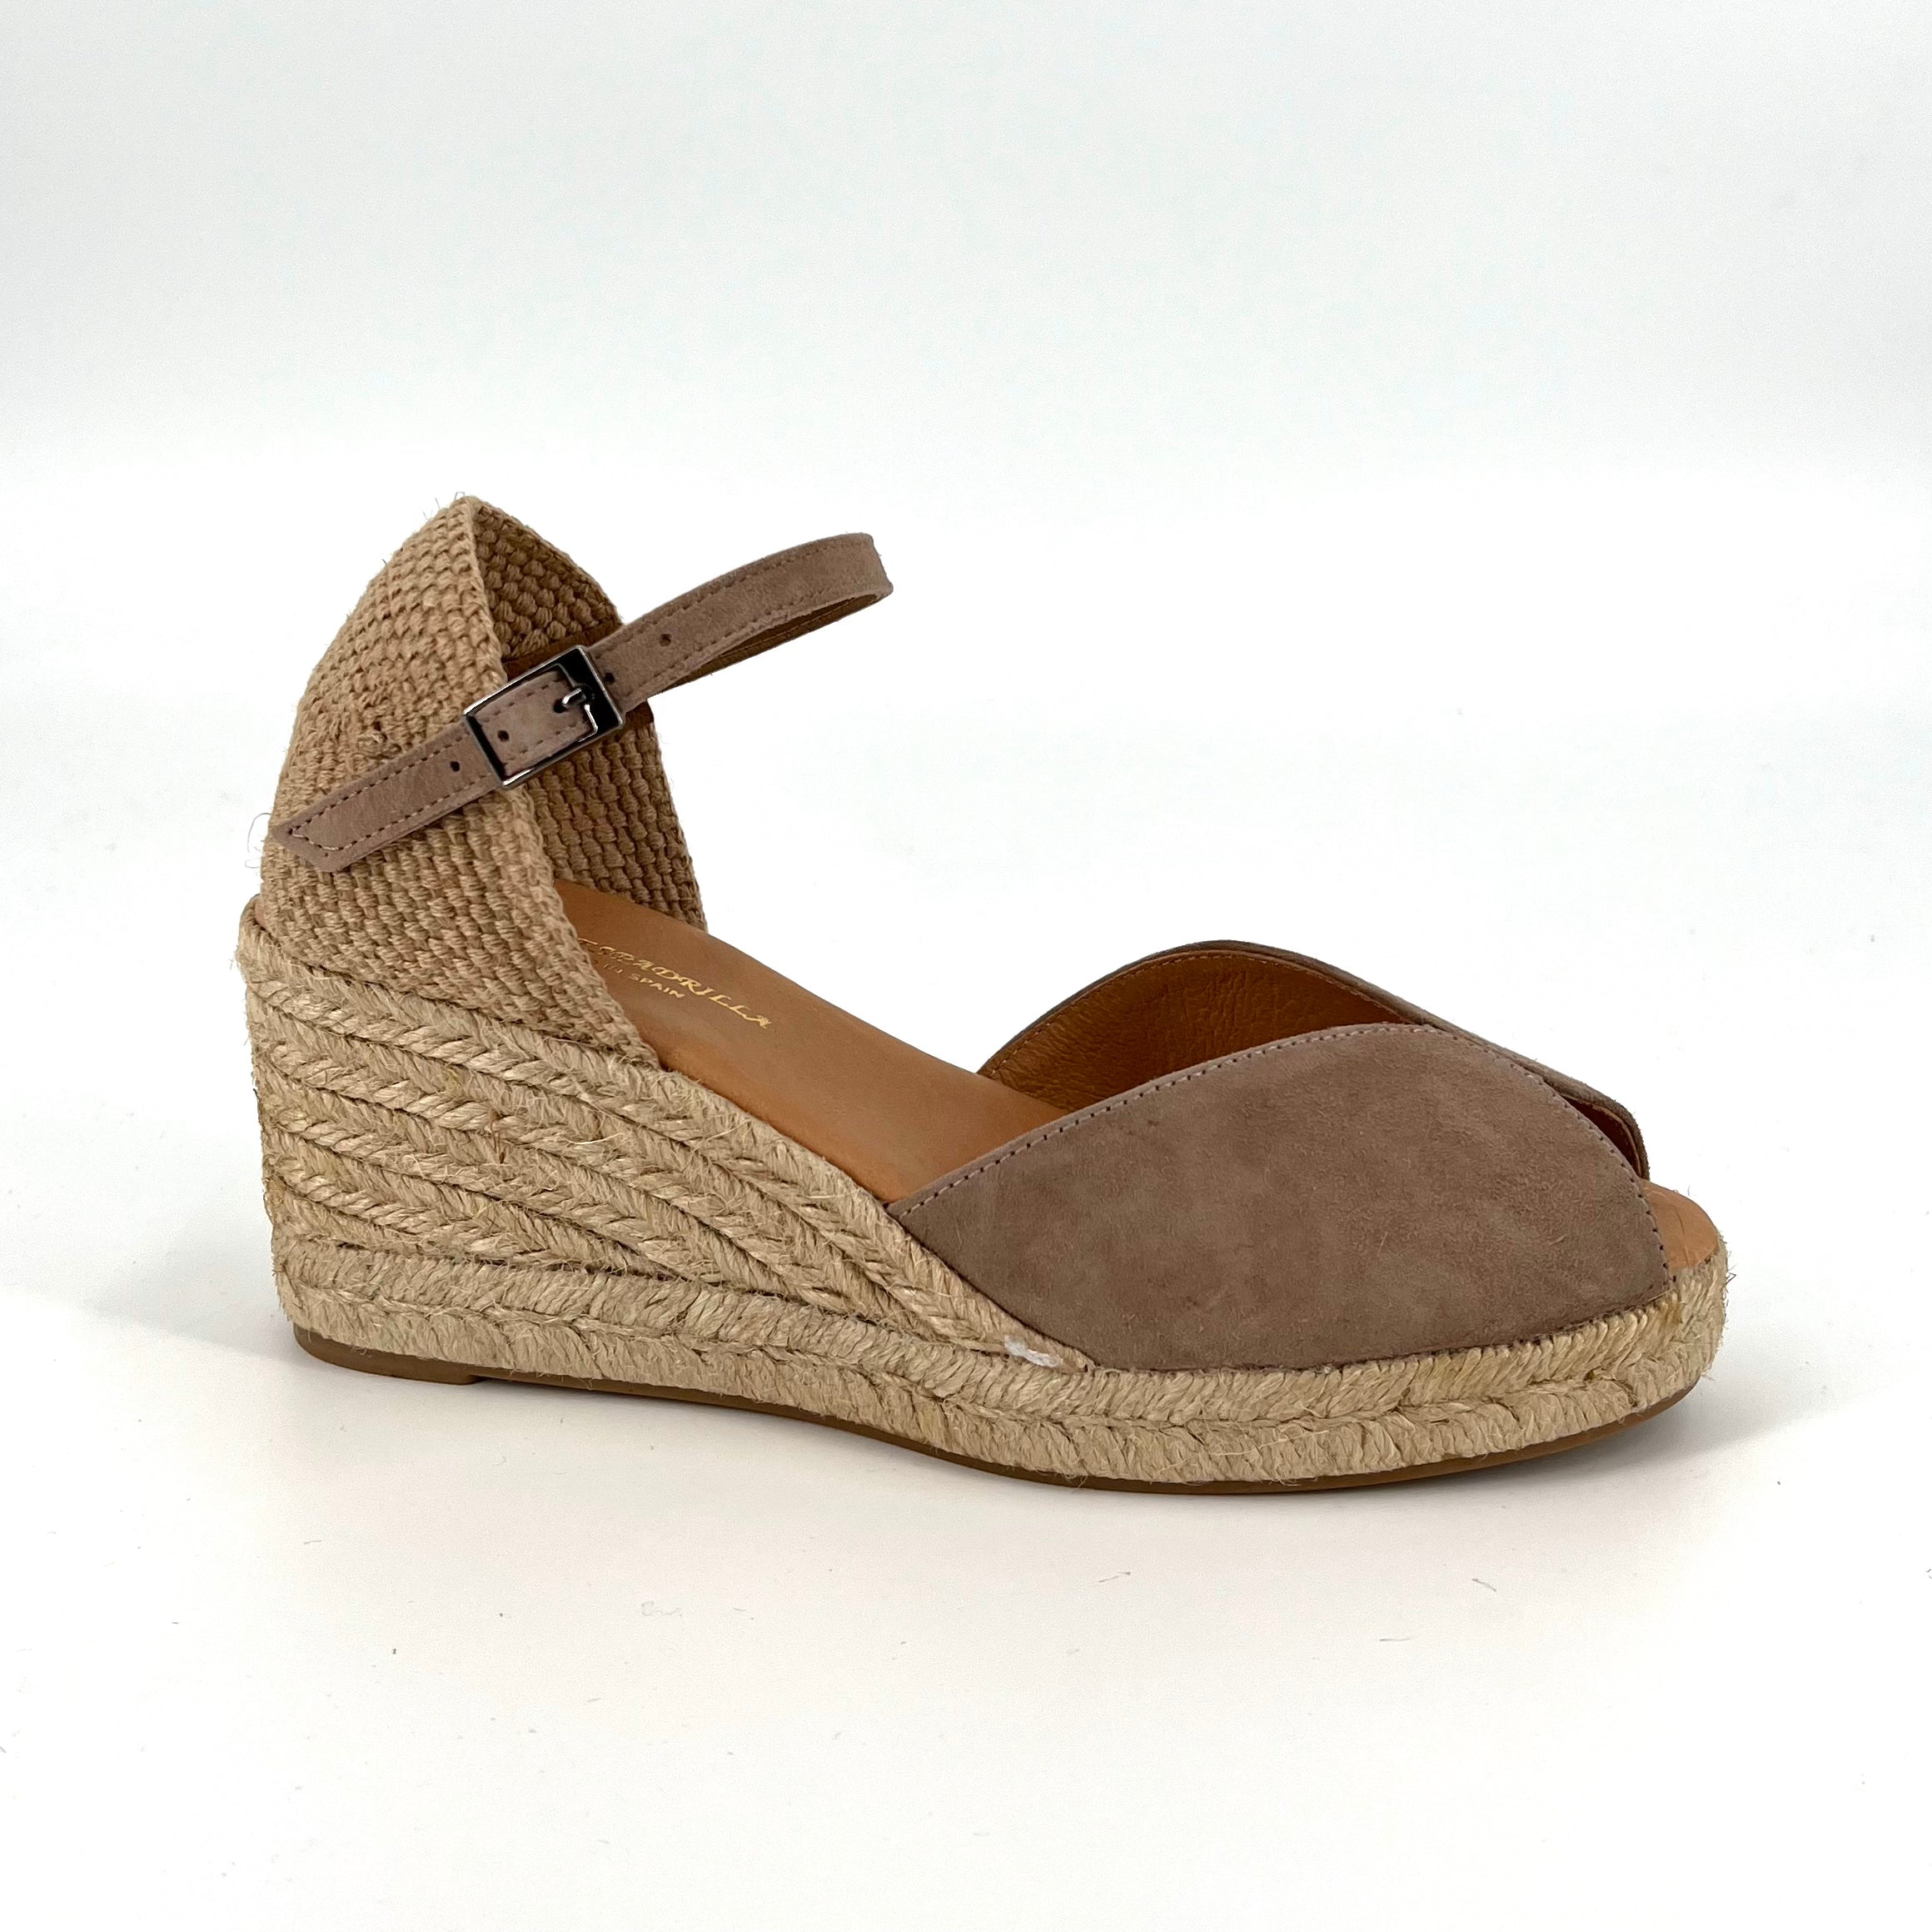 The Peep Toe Espadrille in Taupe